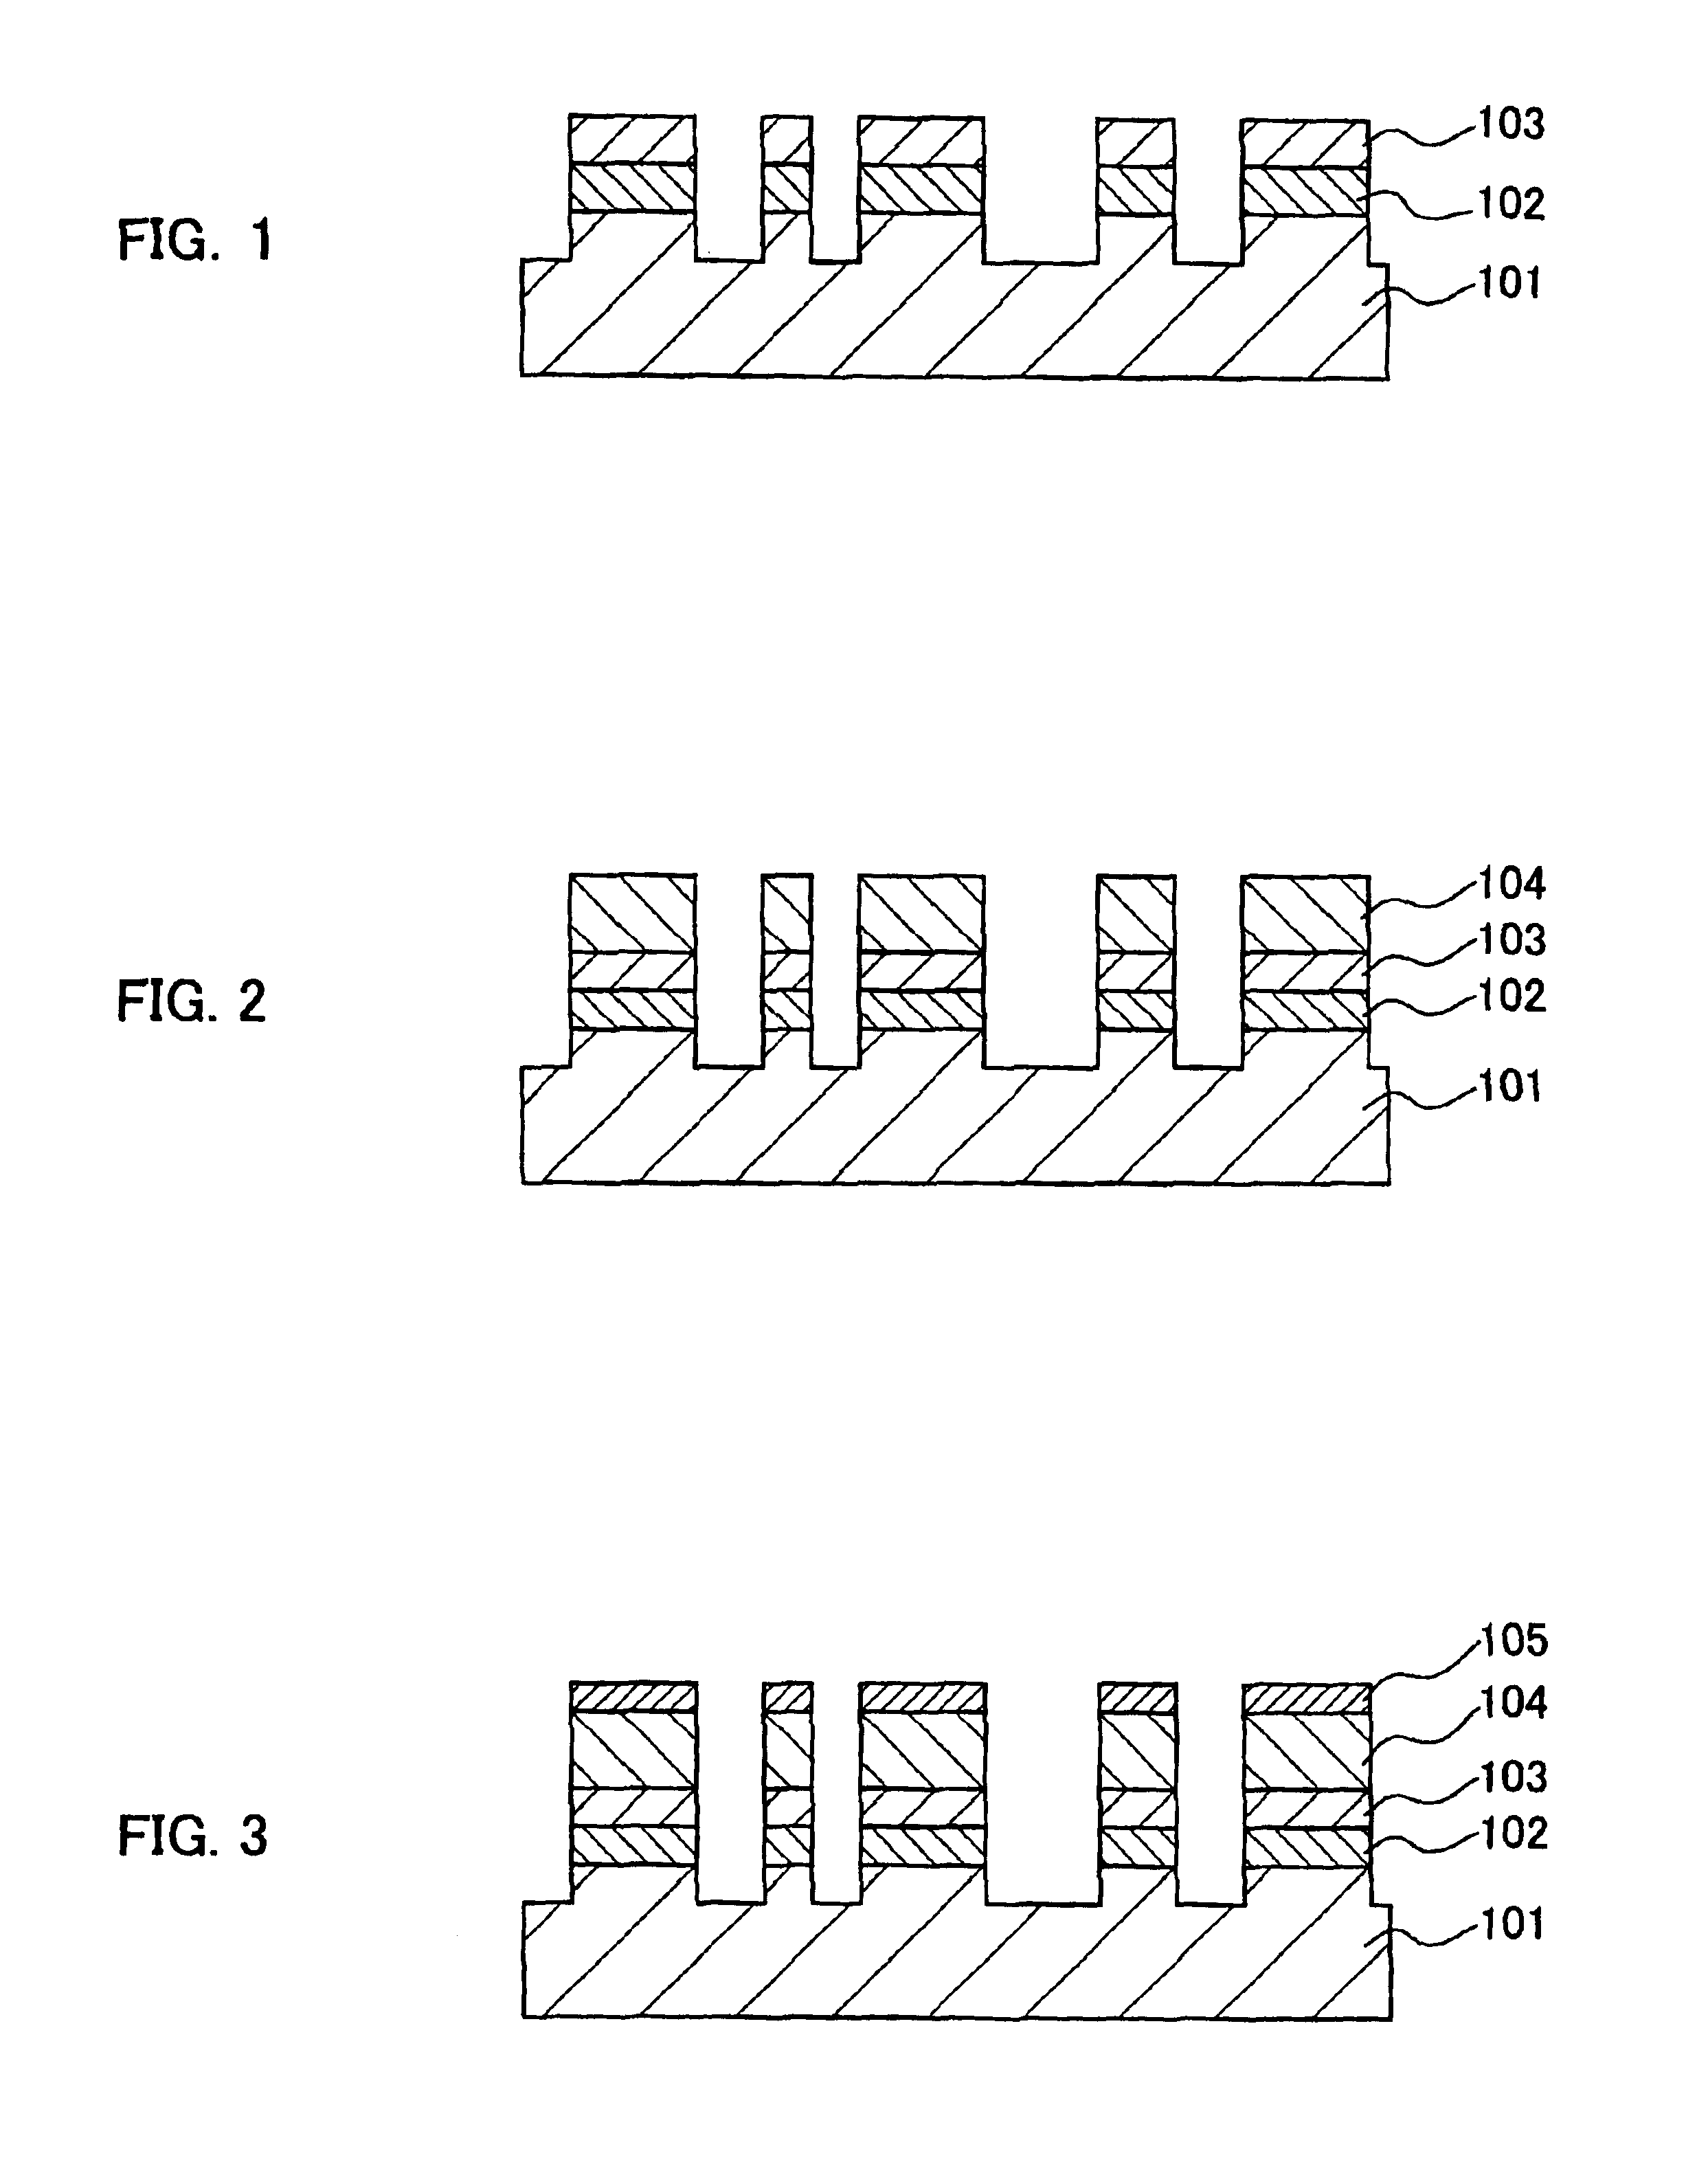 Transfer material for wiring substrate